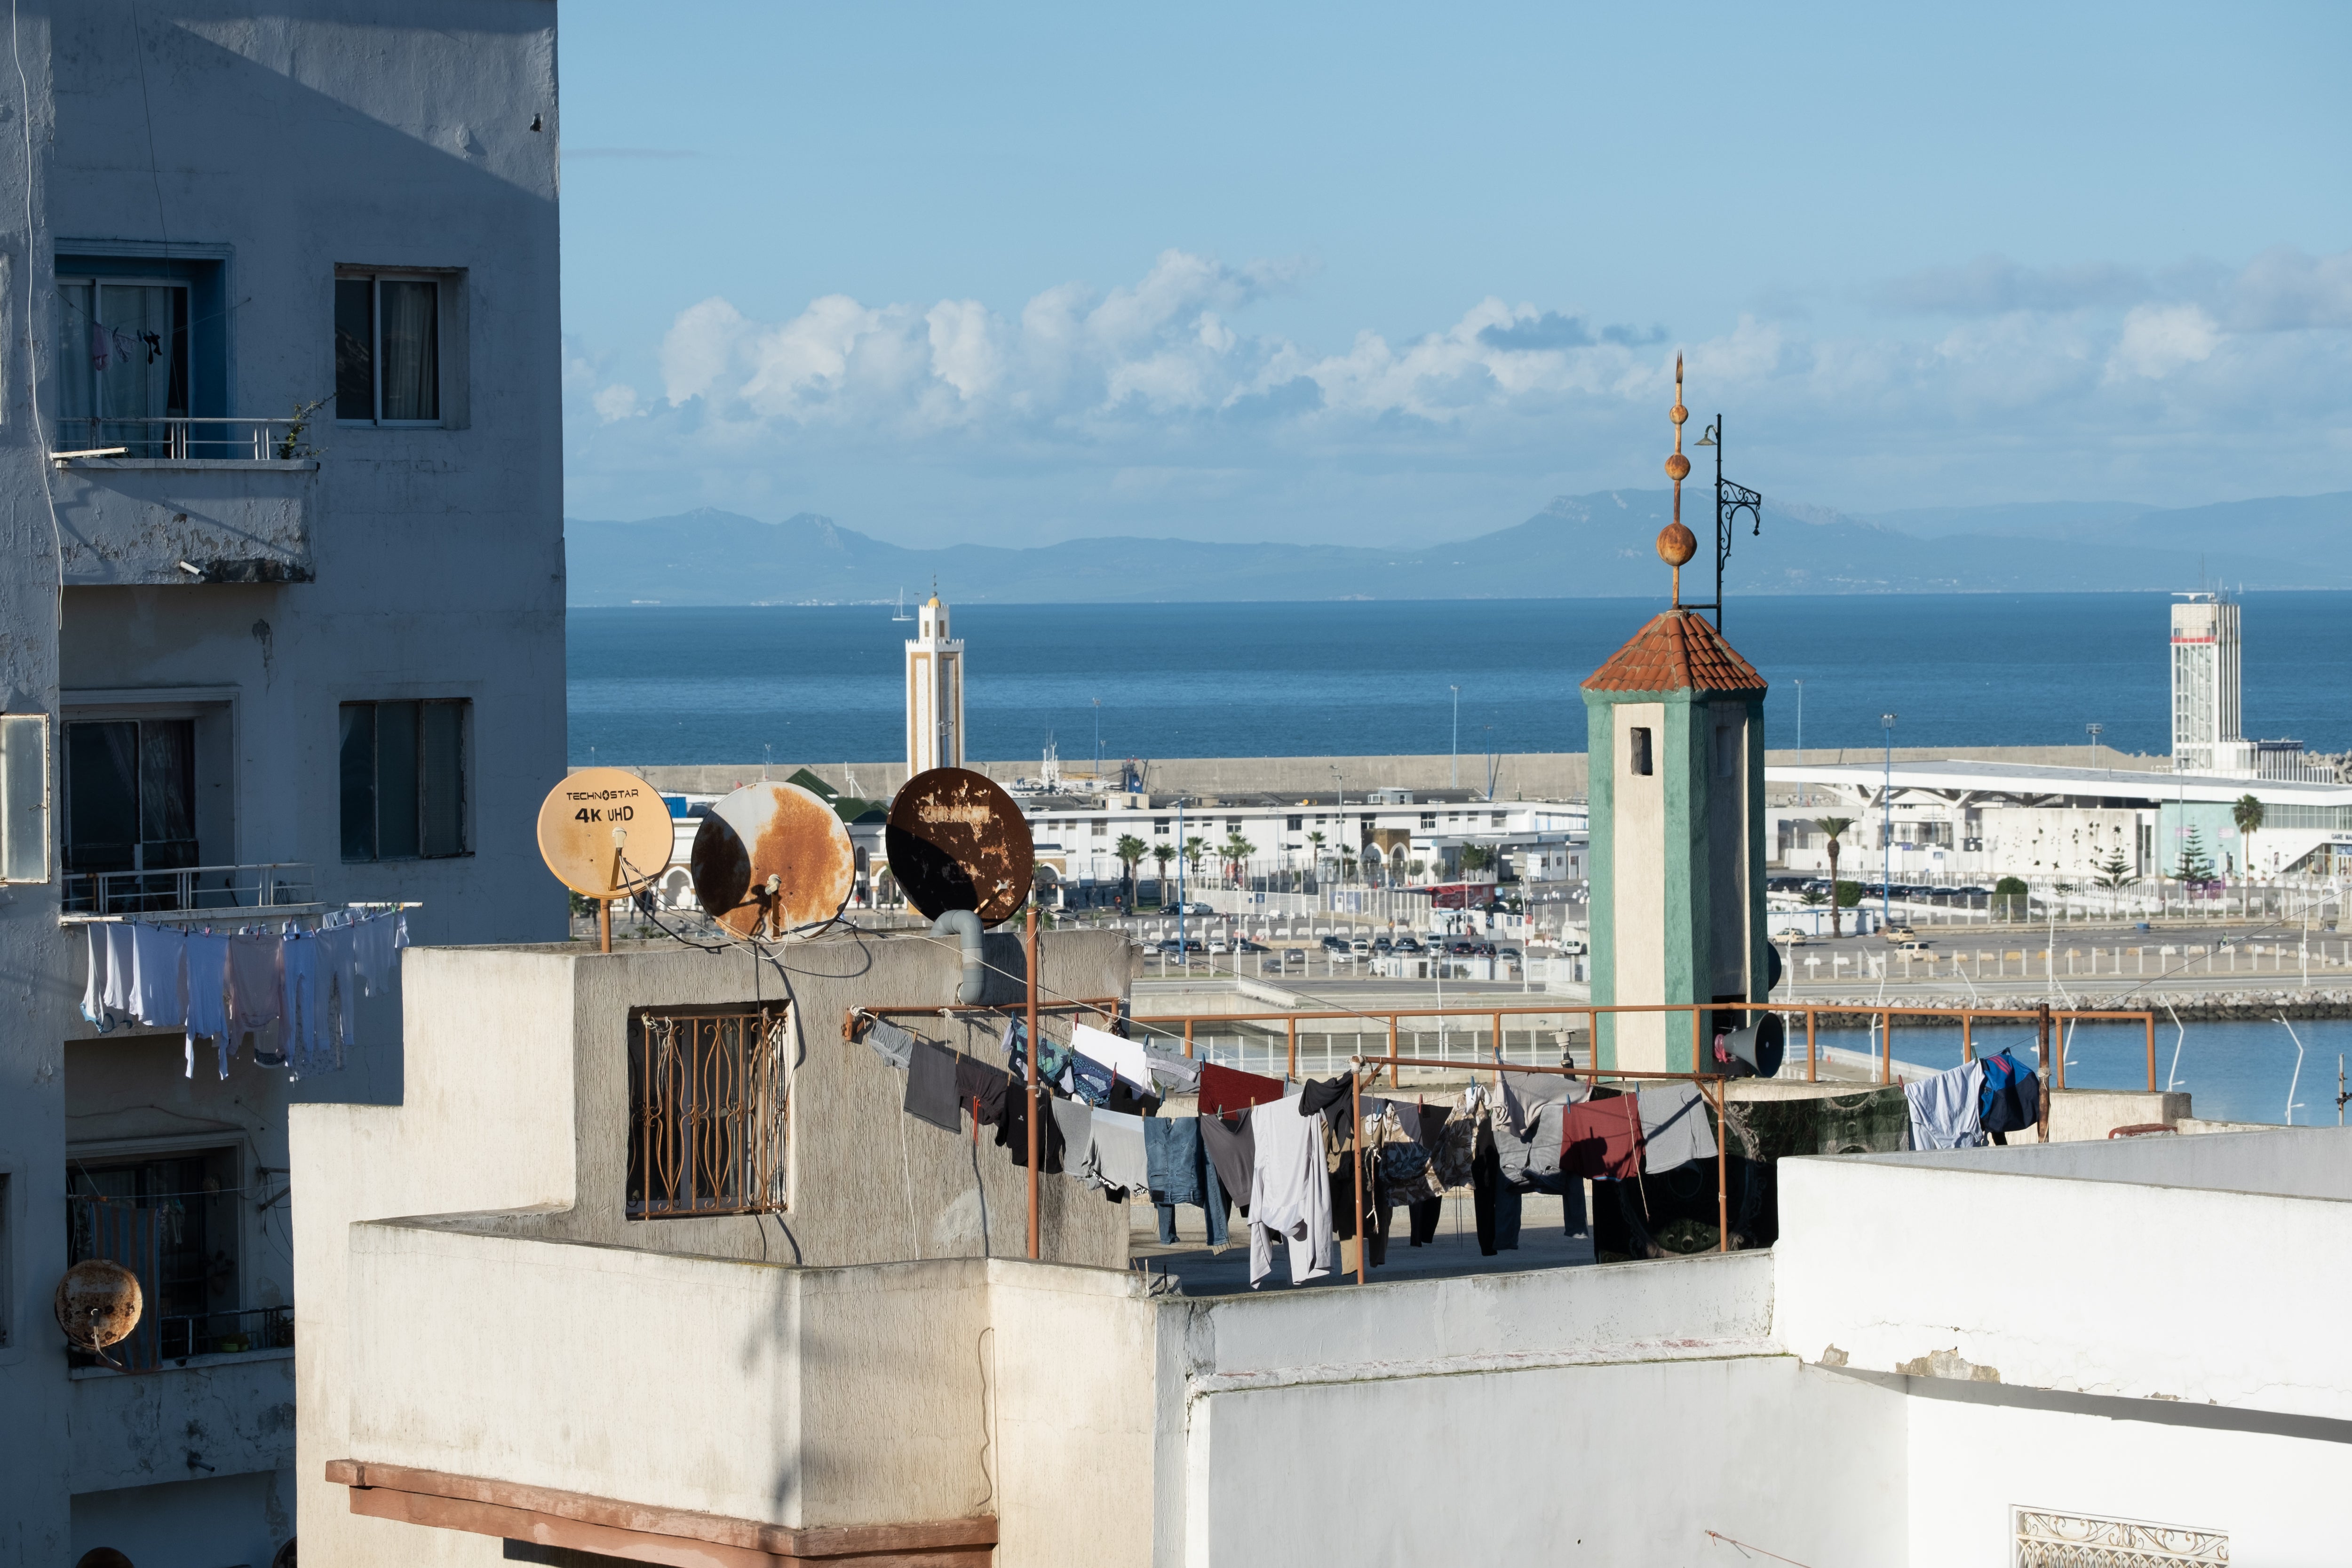 A view over the rooftops in the Morrocan city of Tangier